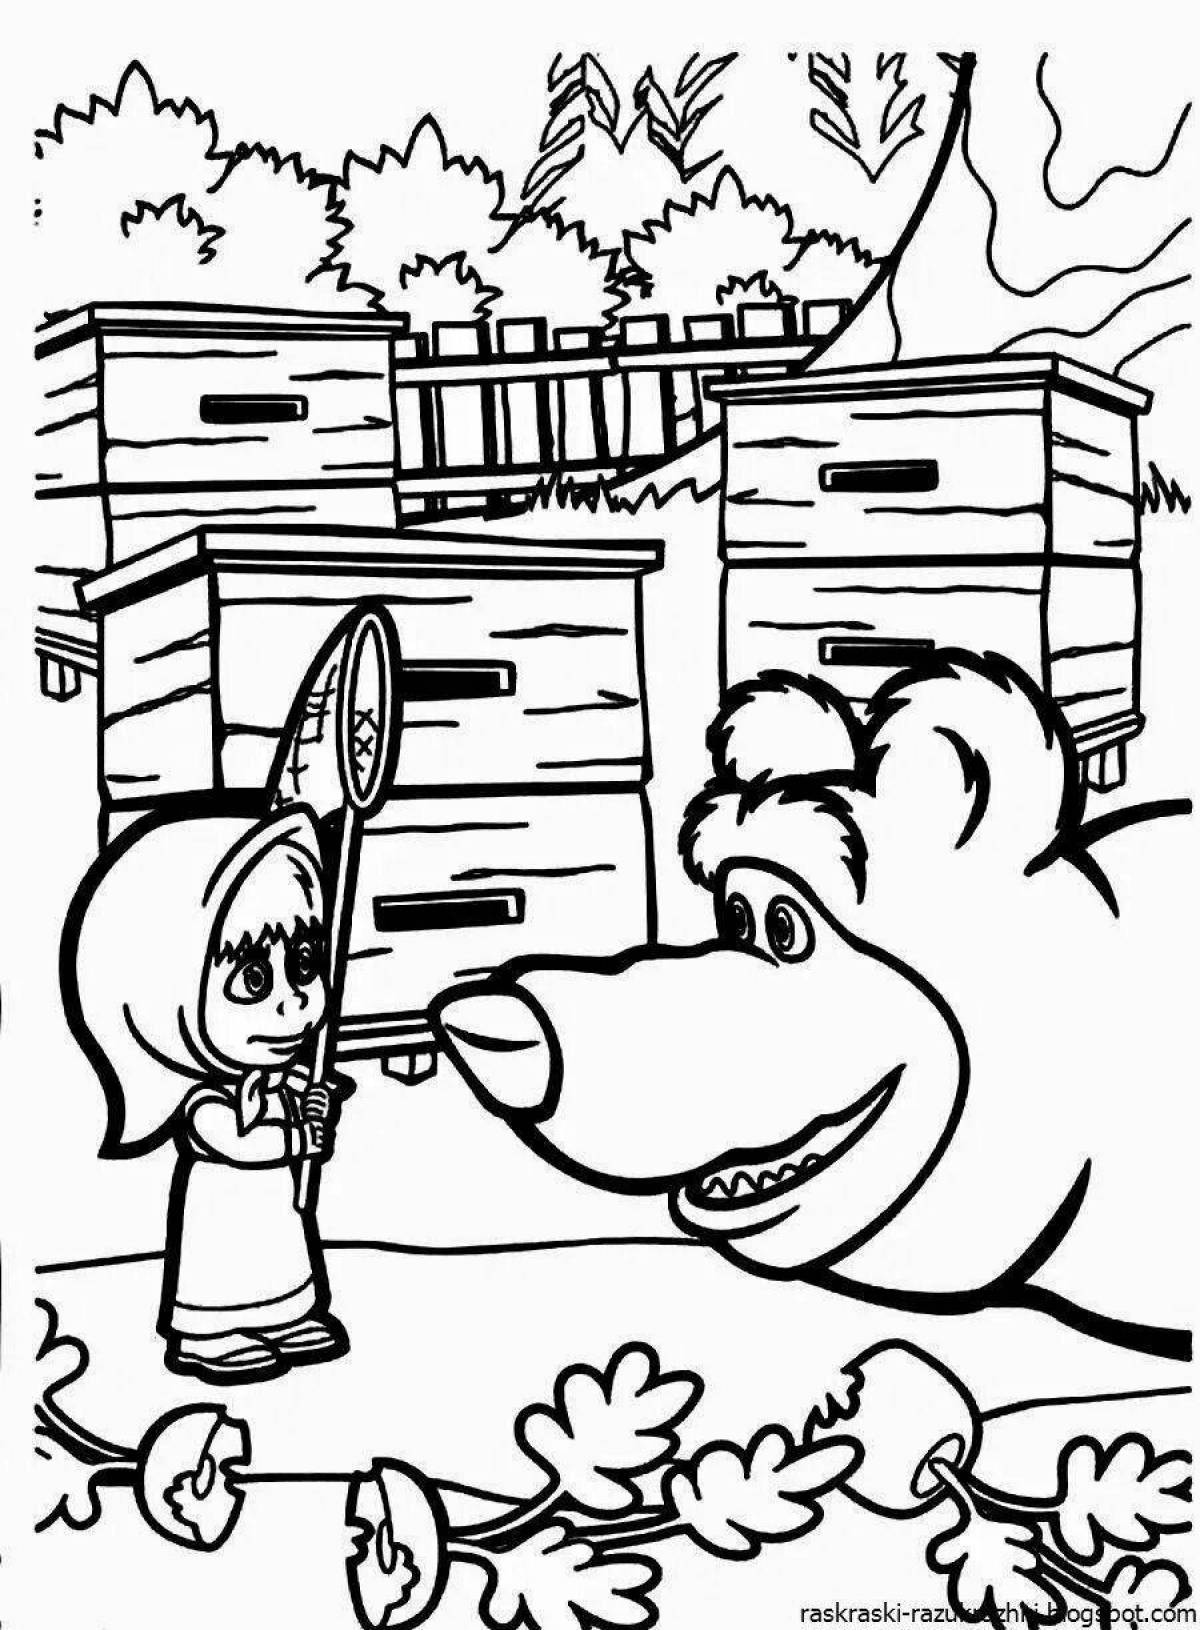 Delightful coloring pages masha and the bear